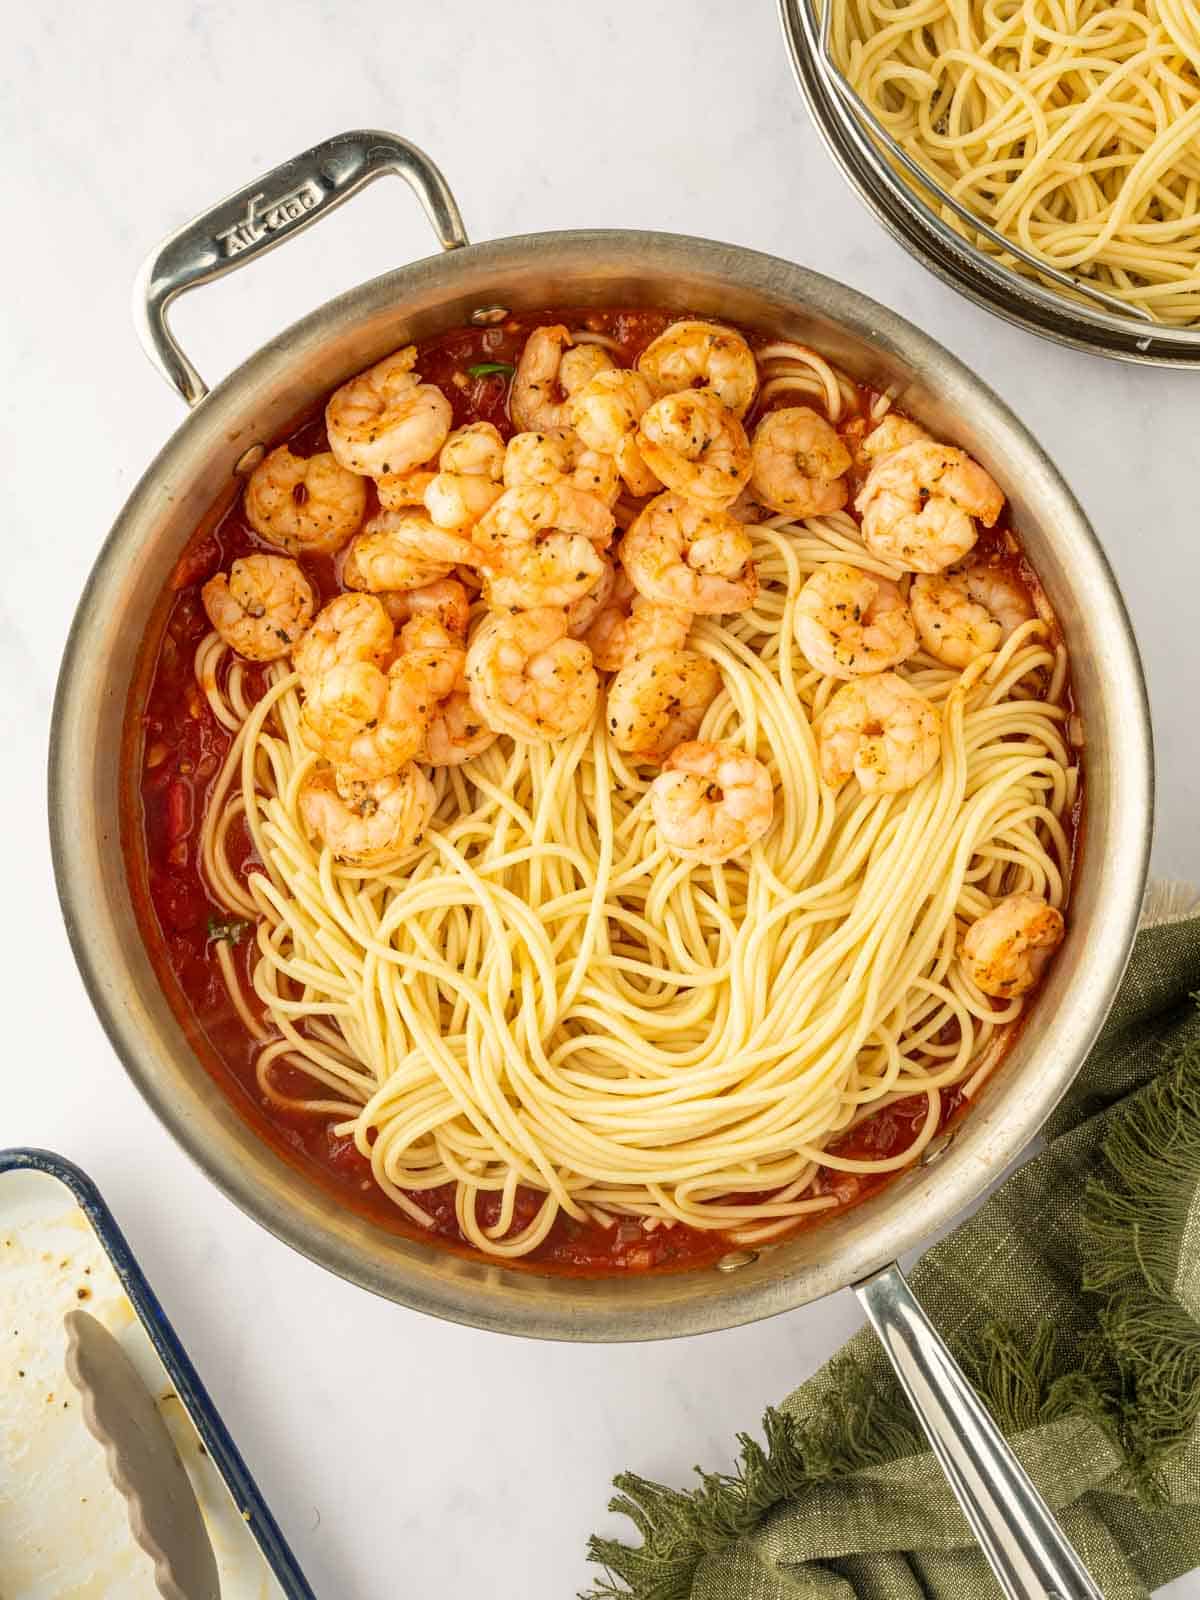 Combine the cooked pasta and shrimp with the sauce in the skillet.